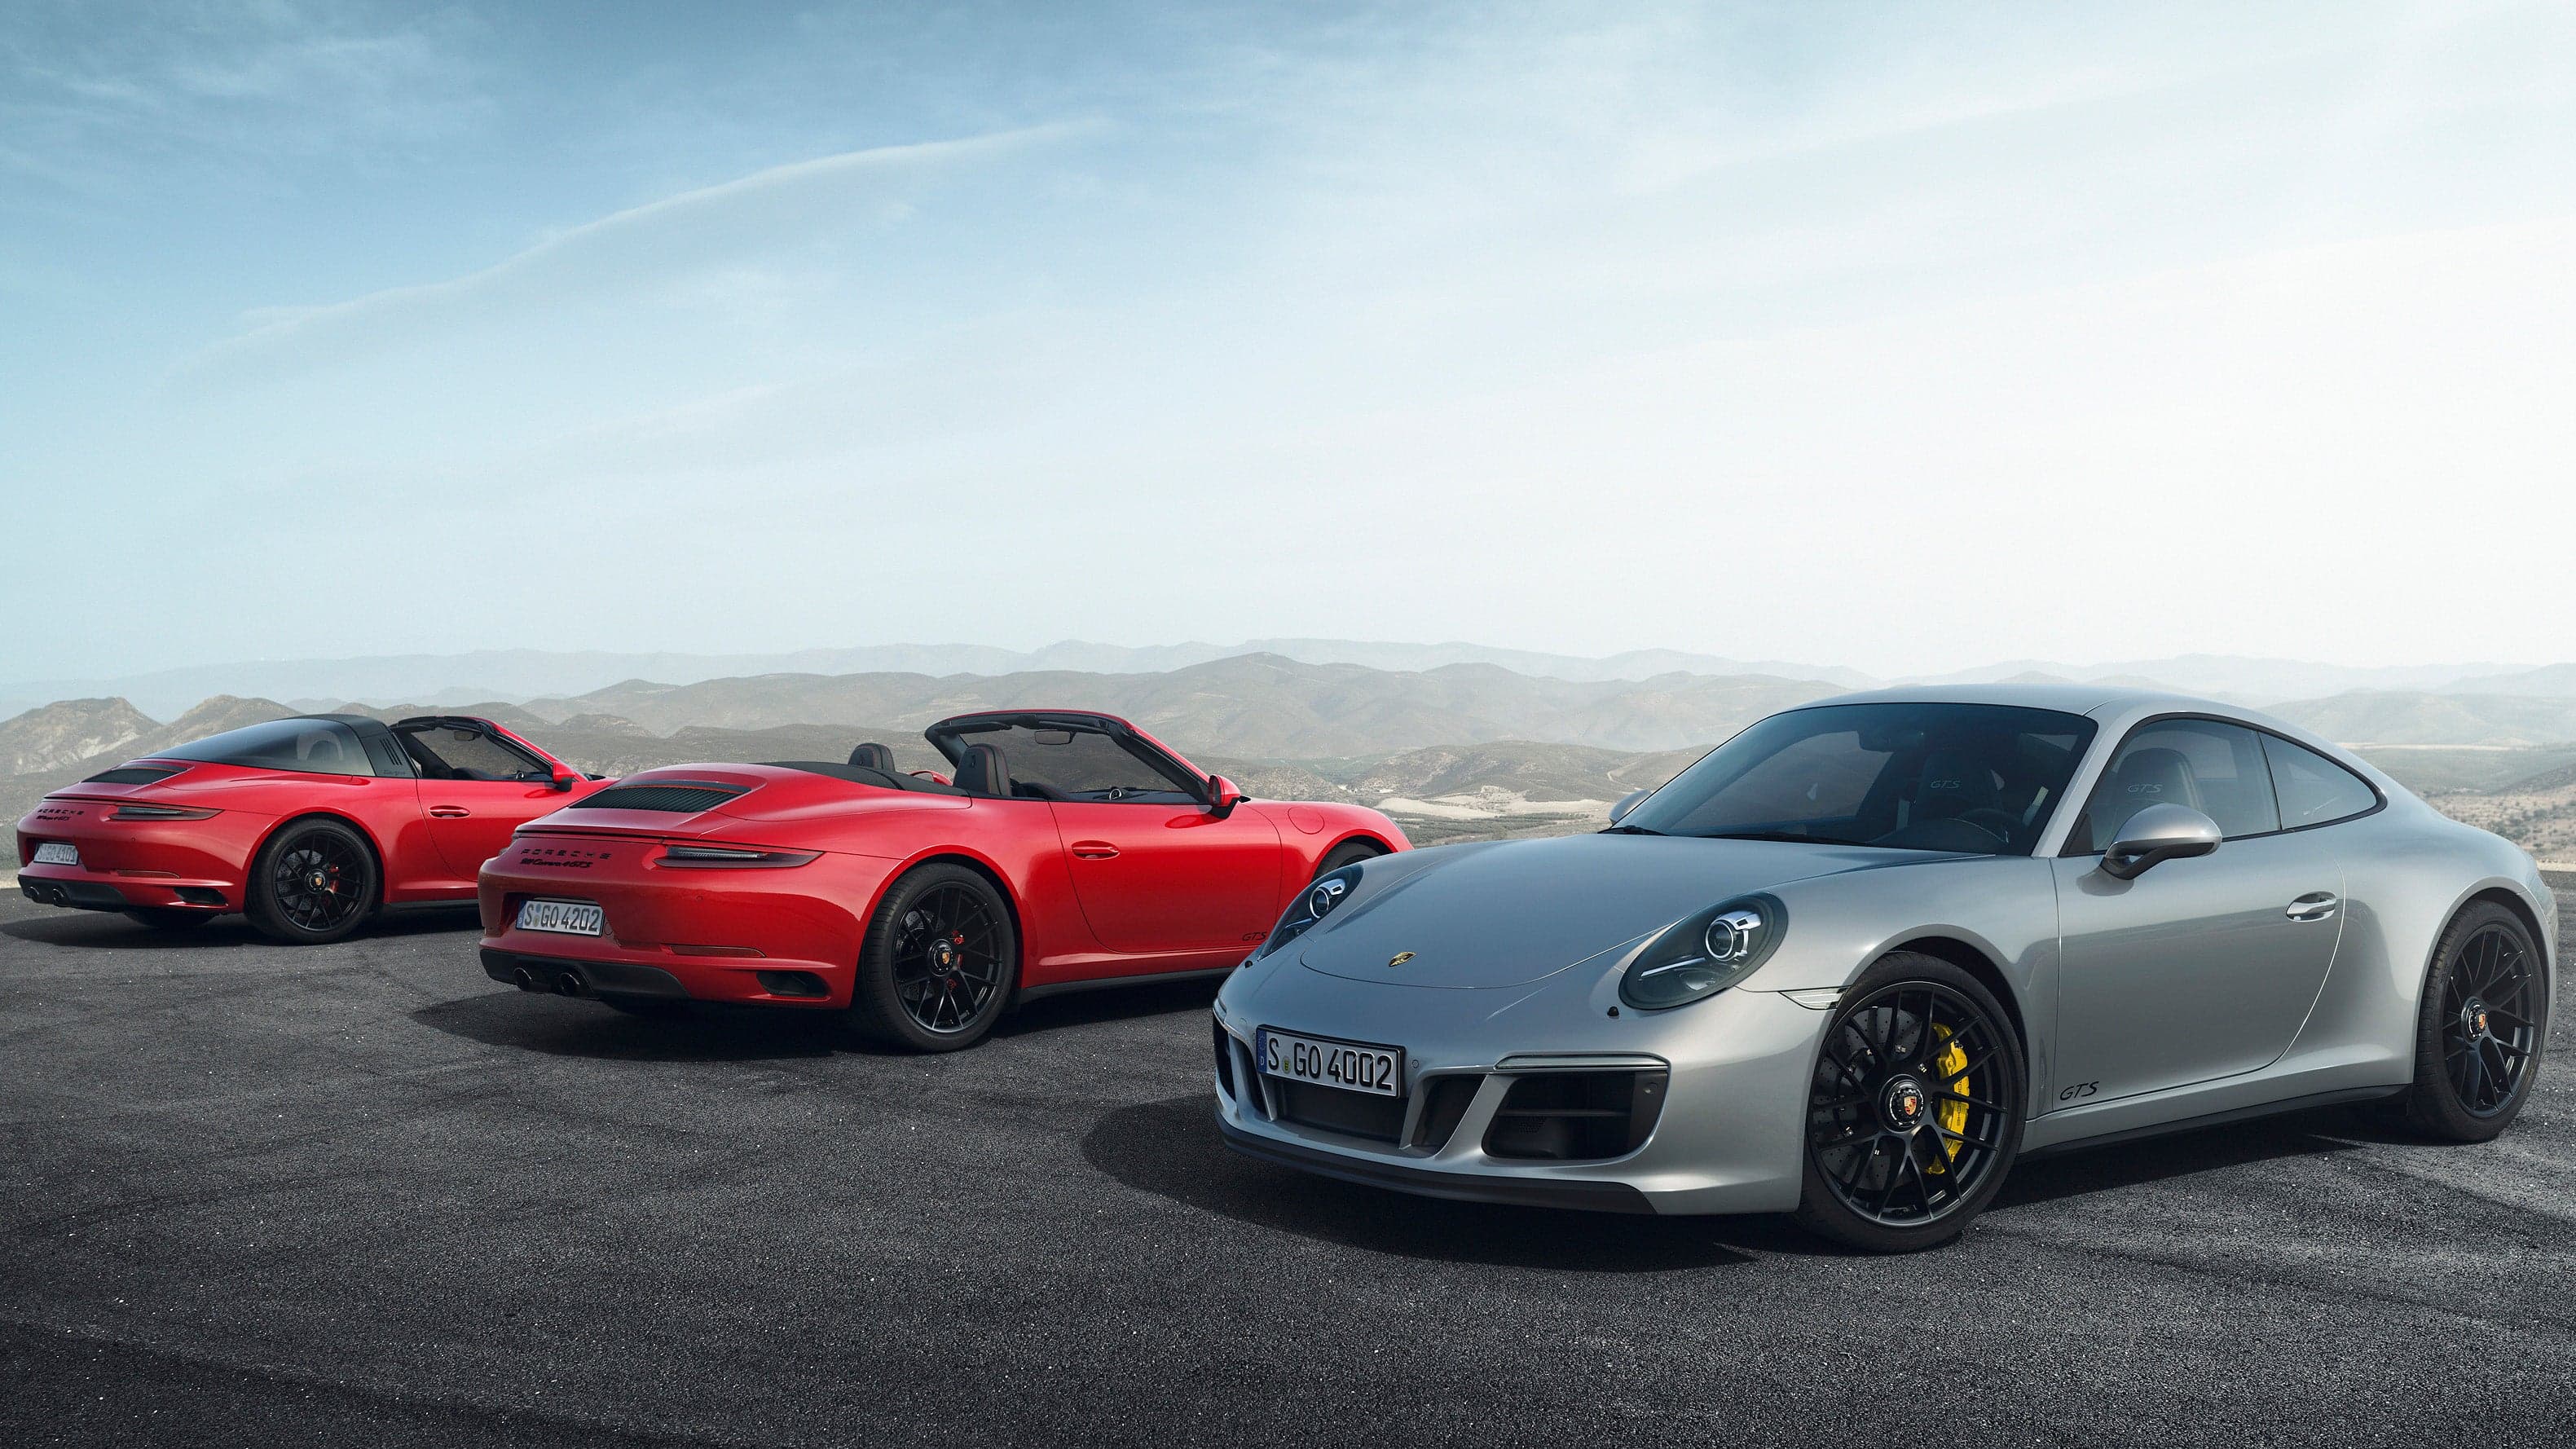 The New 911 GTS Is Here—Is It the Porsche You Want?